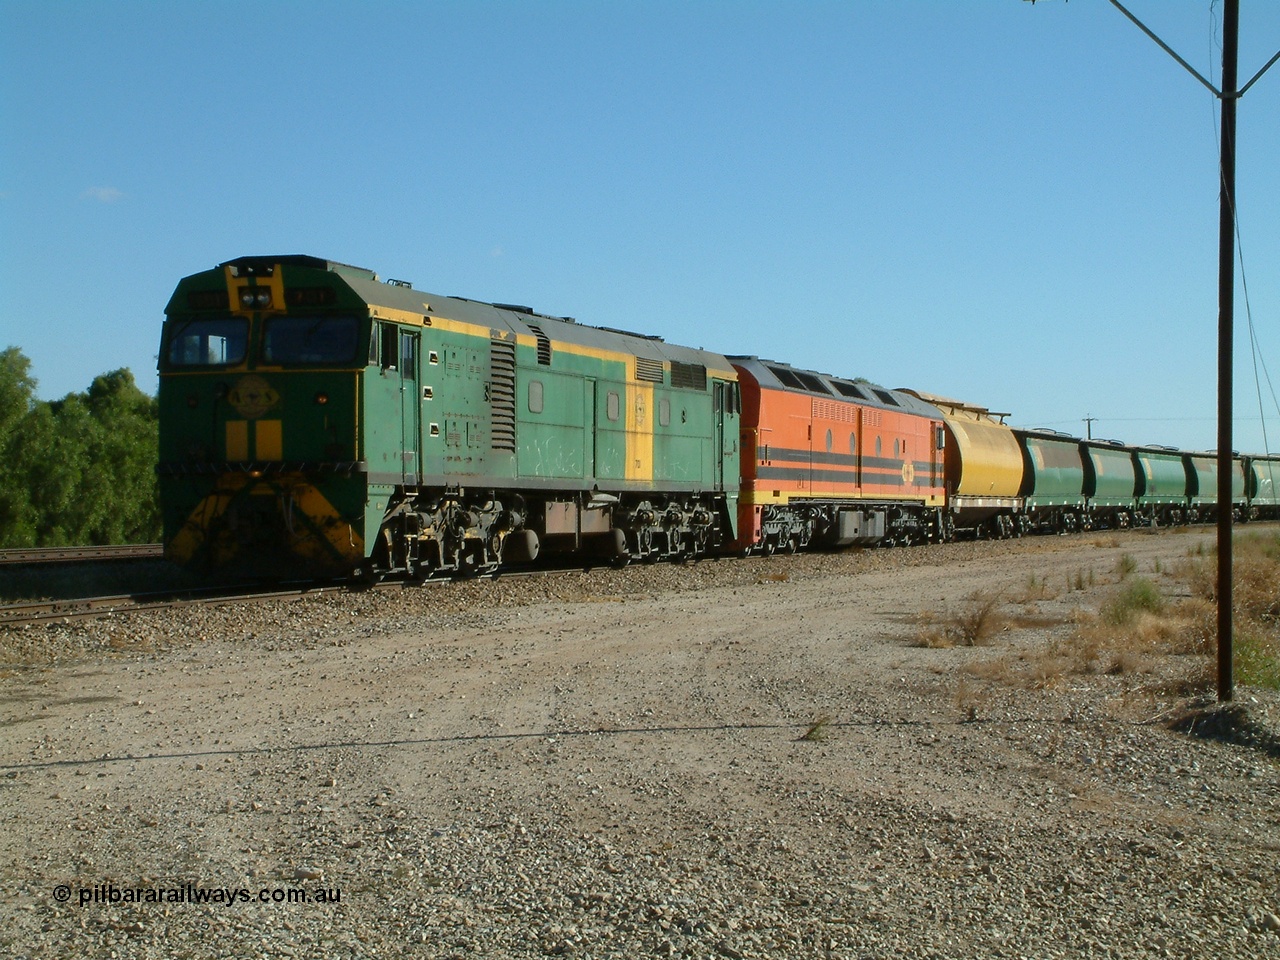 030403 154420
Gladstone, former South Australian Railways AE Goodwin built DL500G ALCo designated the 700 class, class leader 701 serial G6042-2 leads a grain train with an ALF class and first waggon a former WAGR WW now WWS grain waggon, train being loaded on the 3rd April 2003.
Keywords: 700-class;701;G6042-2;AE-Goodwin;ALCo;DL500G;